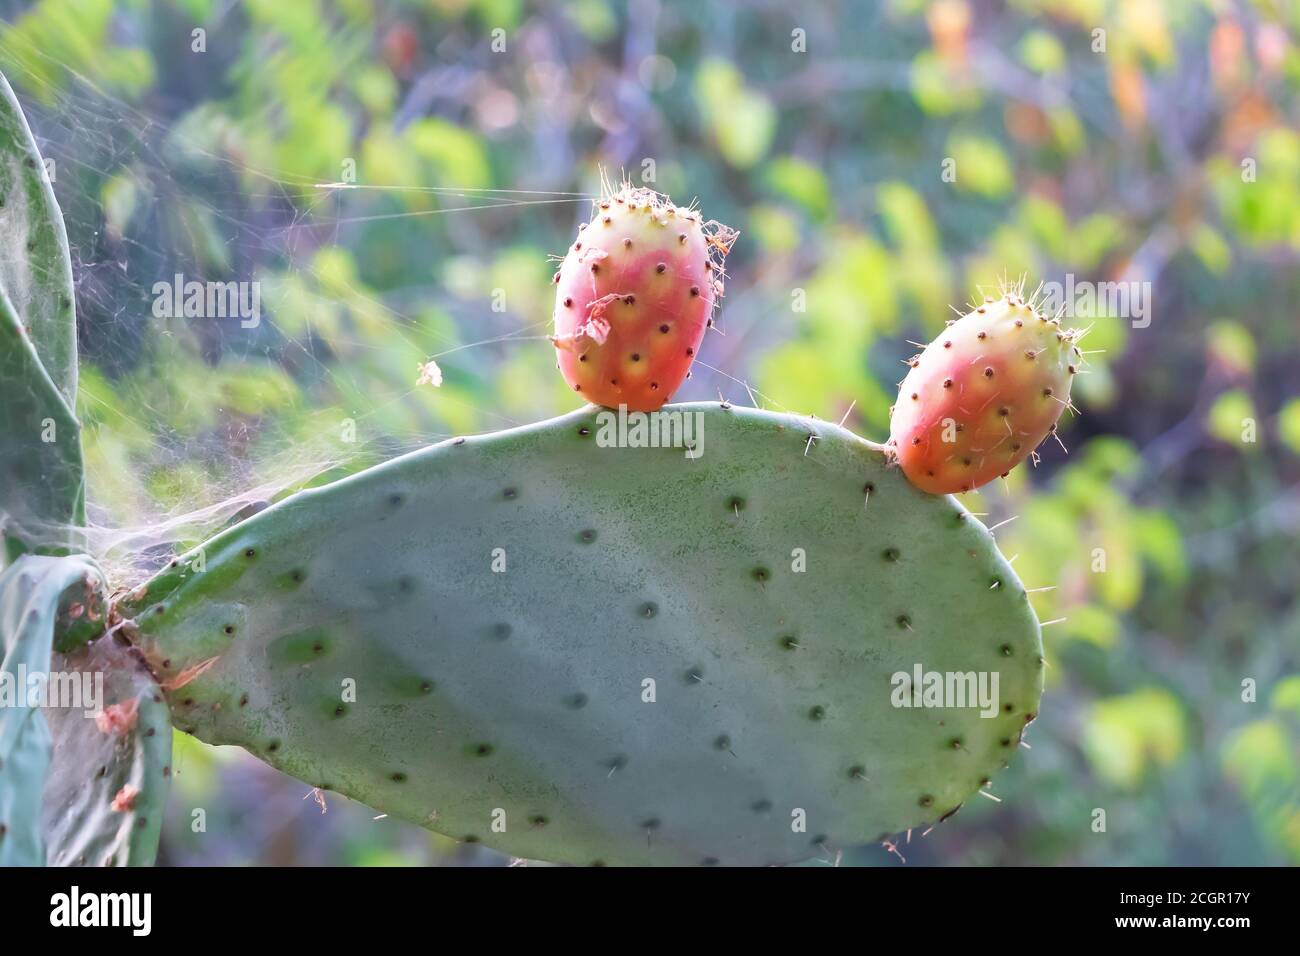 Prickly pear cactus close up with fruit in red color. Opuntia, commonly called prickly pear, is a genus in the cactus family, Cactaceae. Prickly pears Stock Photo